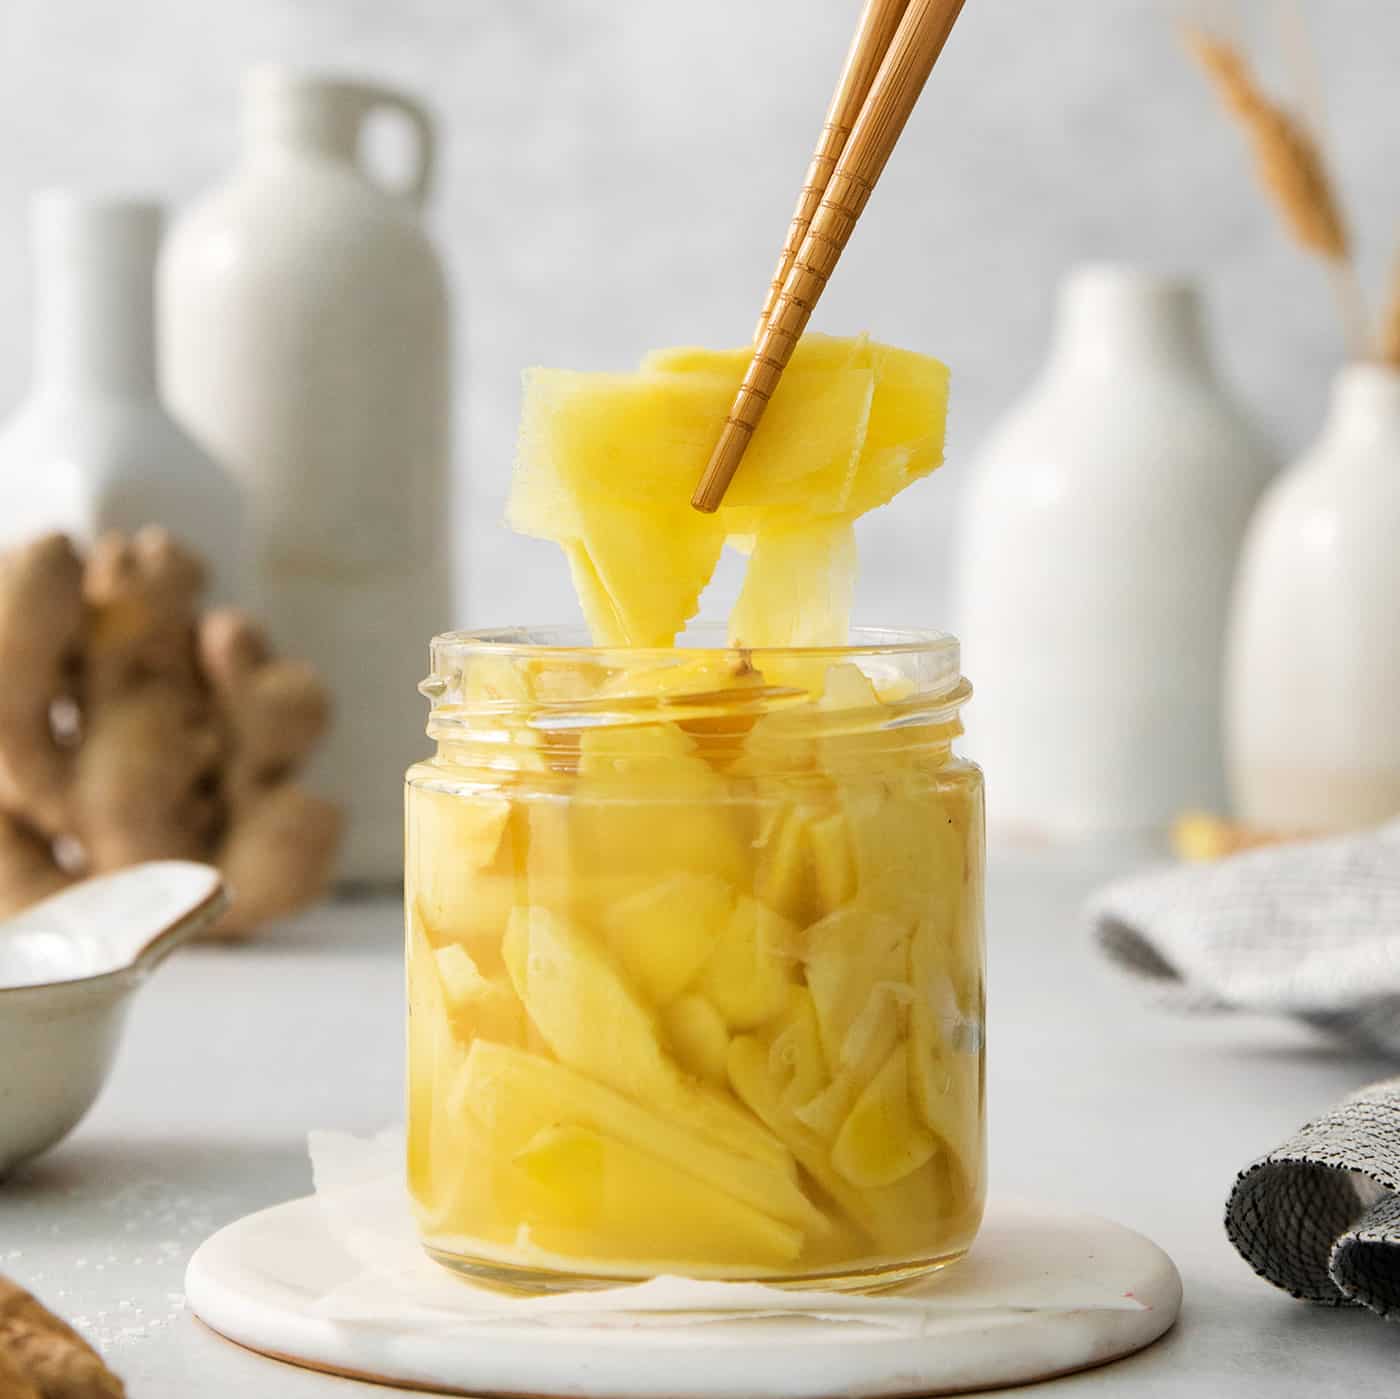 Chopsticks lift out a piece of pickled ginger from a jar.